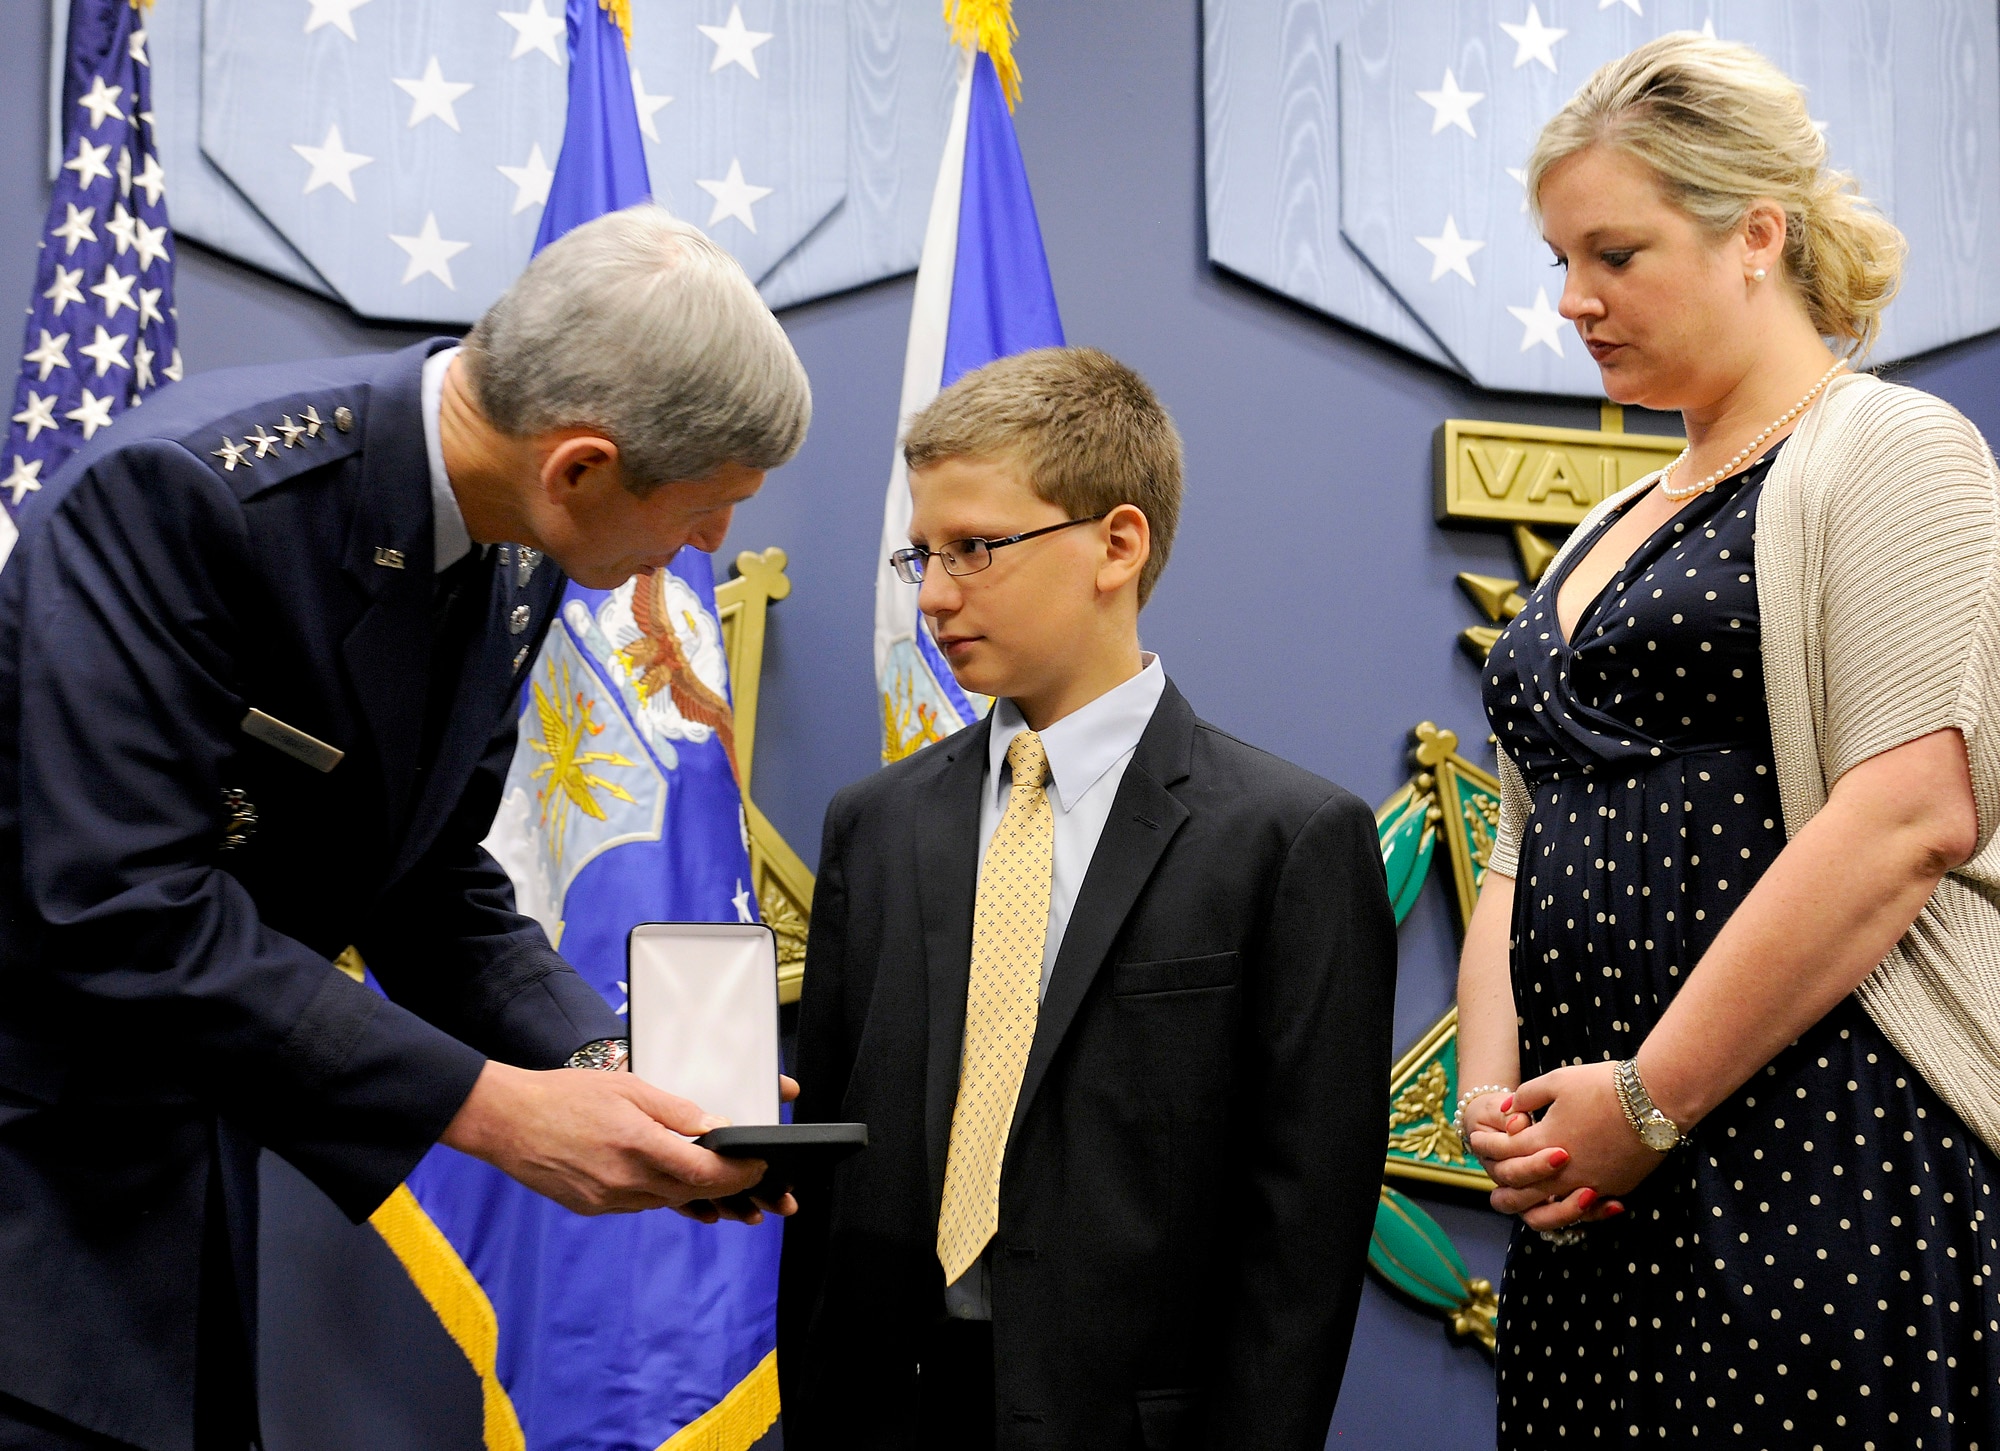 Air Force Chief of Staff Gen. Norton Schwartz presents the Silver Star, posthumously awarded to Capt. Francis Gary Powers, to the captain’s grandchildren, Francis Gary “Trey” Powers III and Lindsey Barry, on June 15, 2012, in the Pentagon. Captain Powers was shot down over the Soviet Union on May 1, 1960, and received the decoration for the heroism he displayed while held prisoner by the Soviets. He was released in 1962 but subsequently died in a 1977 helicopter crash. (U.S. Air Force photo/Scott M. Ash)